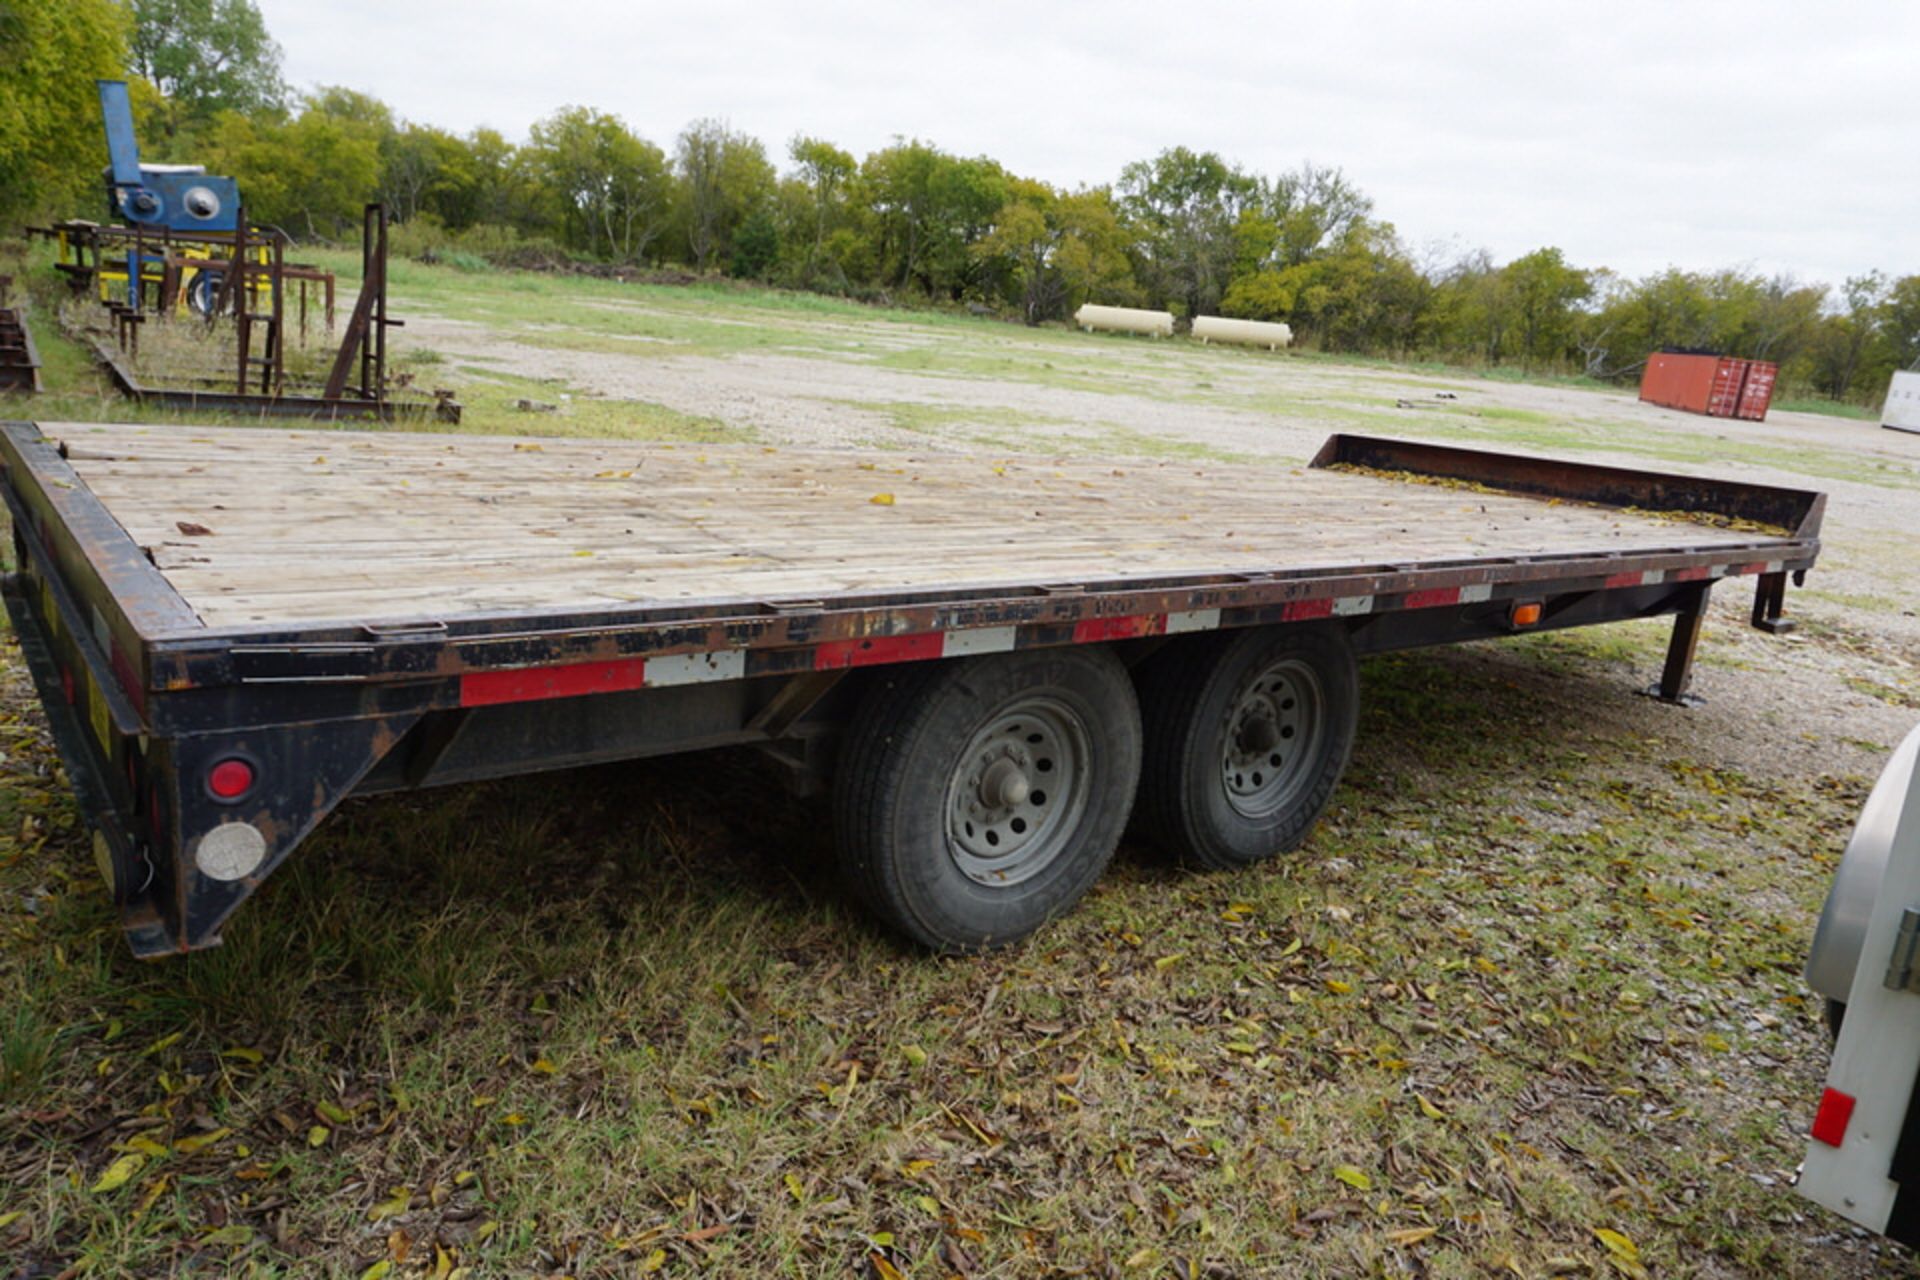 2006 8' x 20' APACHE TRAILER, 12,000 LB MAX LOAD (MUST BE REMOVED BY DECEMBER 22) - Image 3 of 6